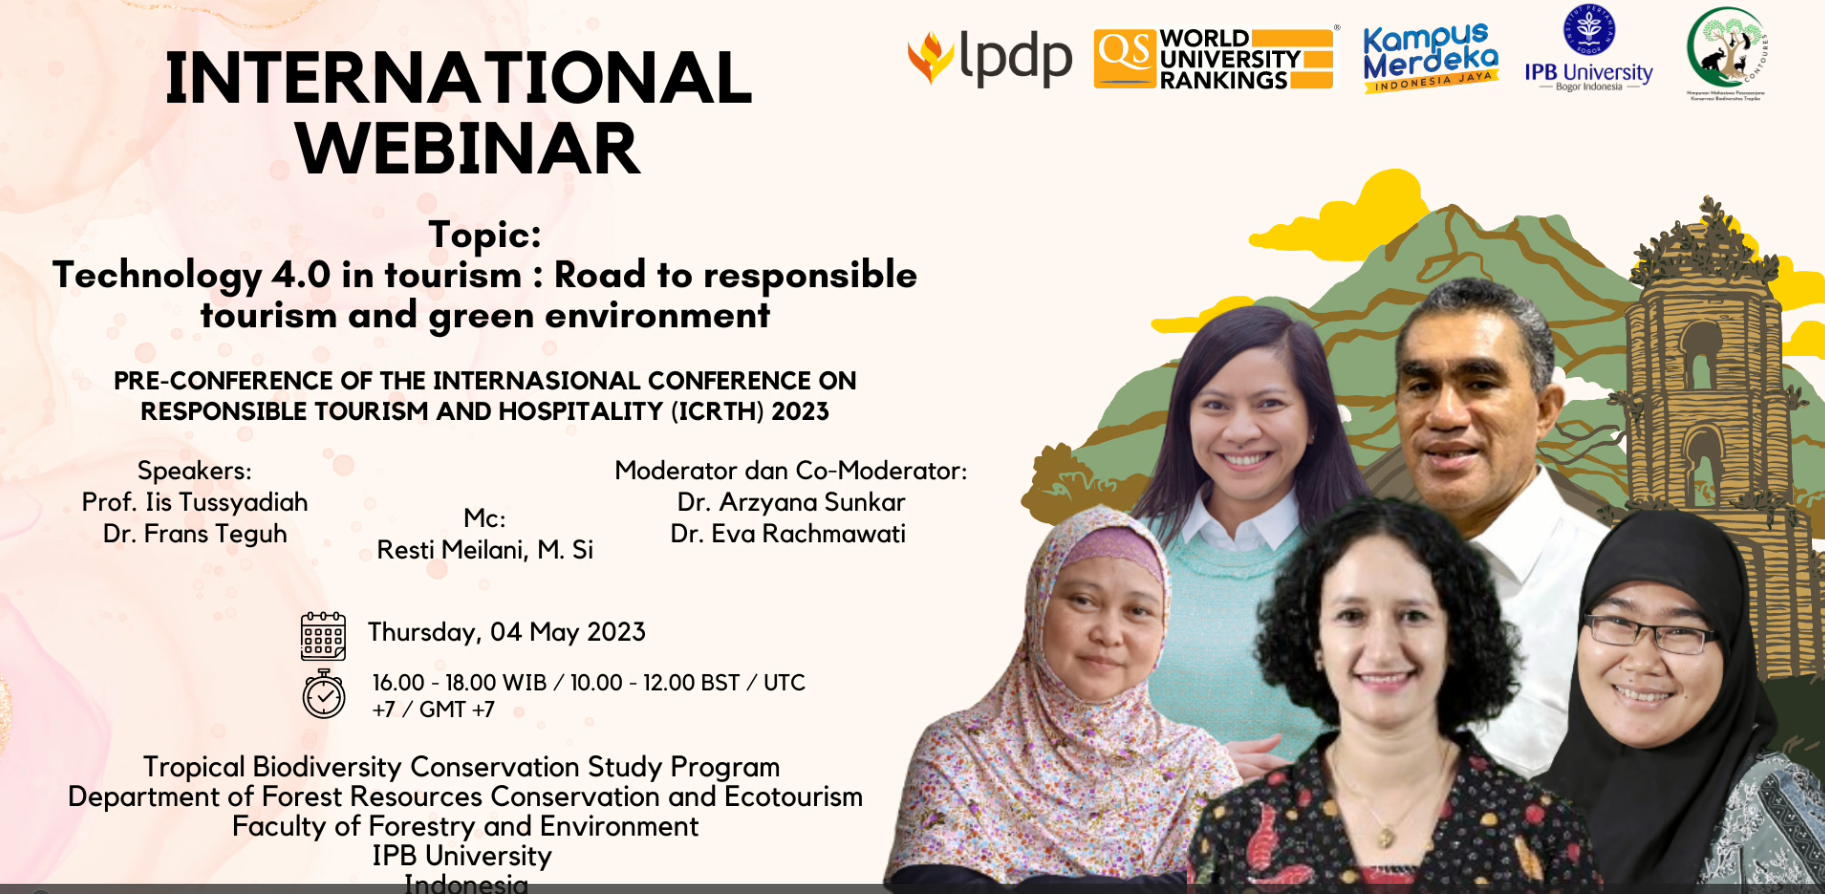 Webinar Internasional : Technology 4.0 in Tourism “Road to Responsible Tourism and Green Environment”